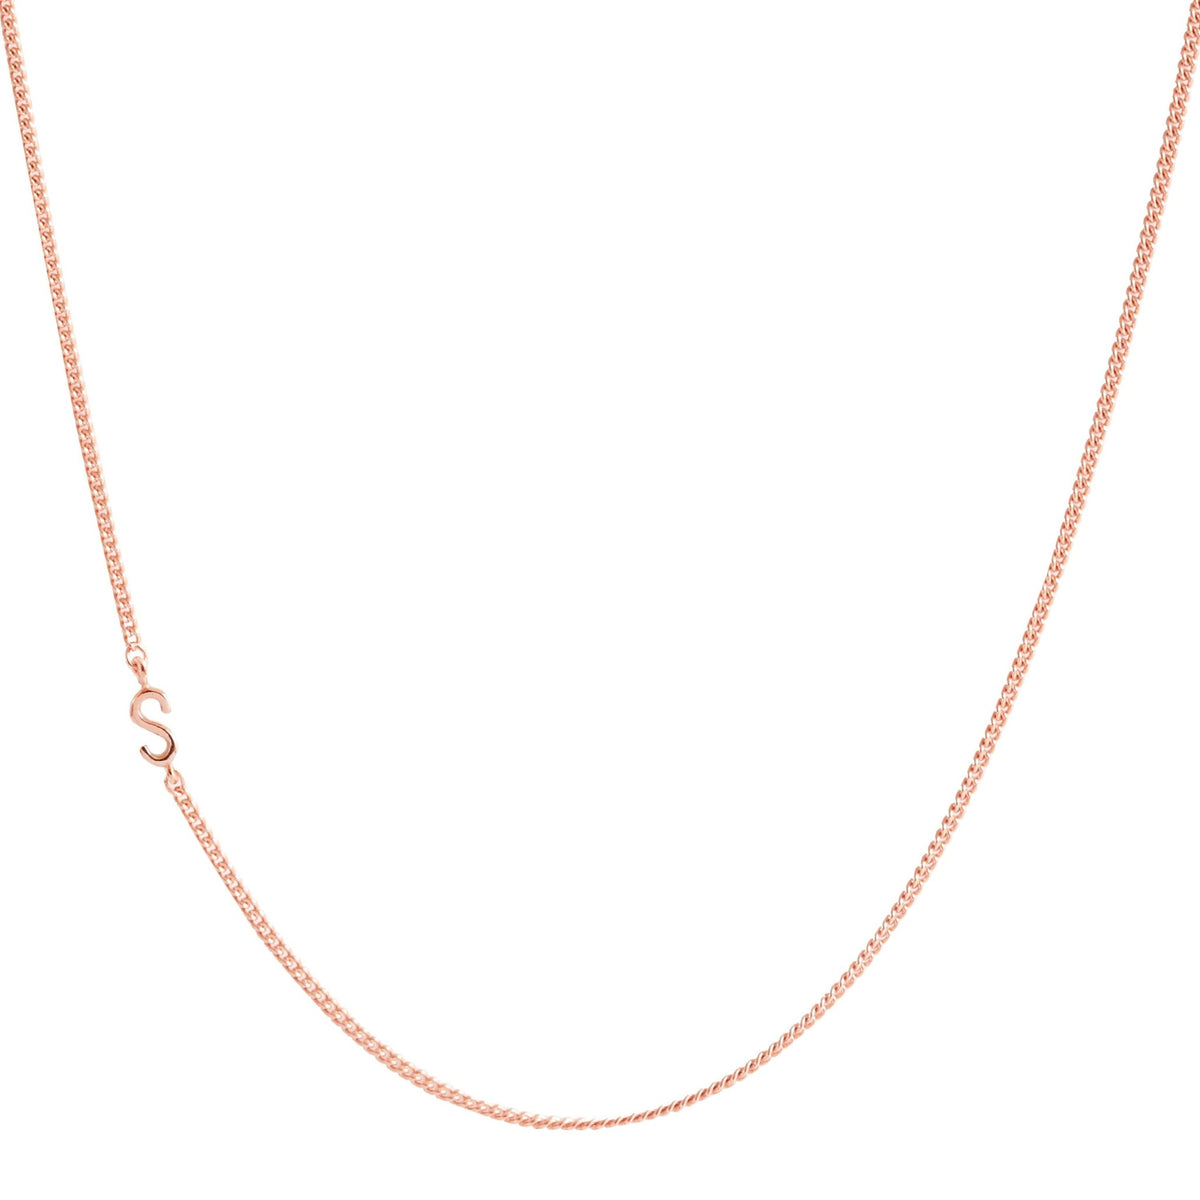 NOTABLE OFFSET INITIAL NECKLACE - S - GOLD, ROSE GOLD, OR SILVER - SO PRETTY CARA COTTER